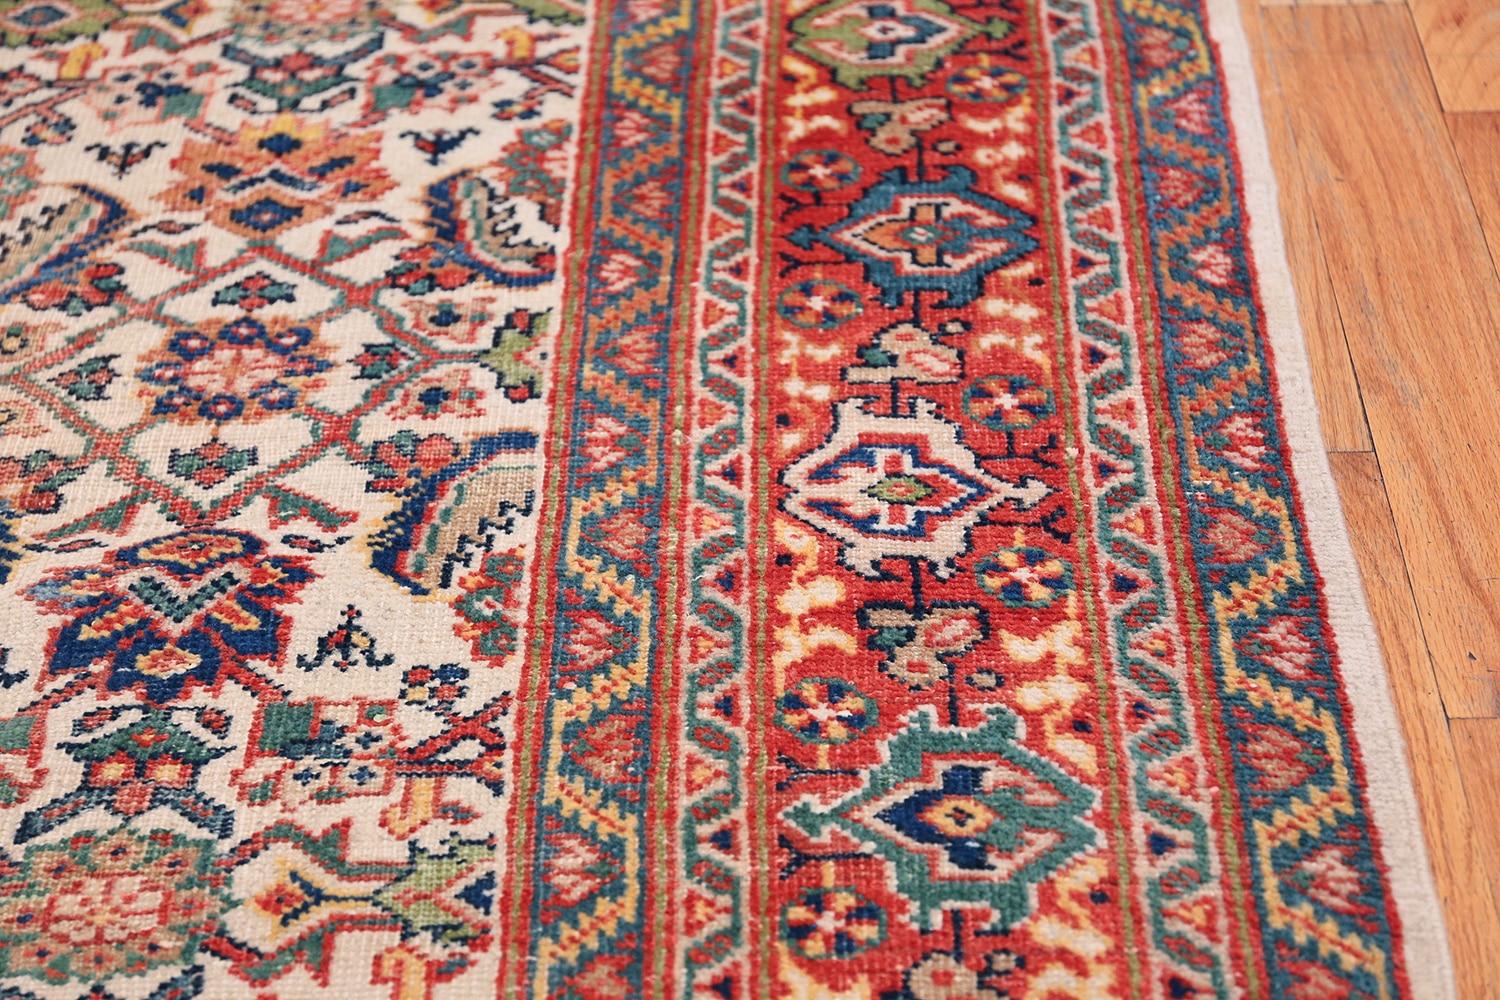 20th Century Antique Persian Sultanabad Carpet. Size: 8 ft x 10 ft 7 in (2.44 m x 3.23 m)